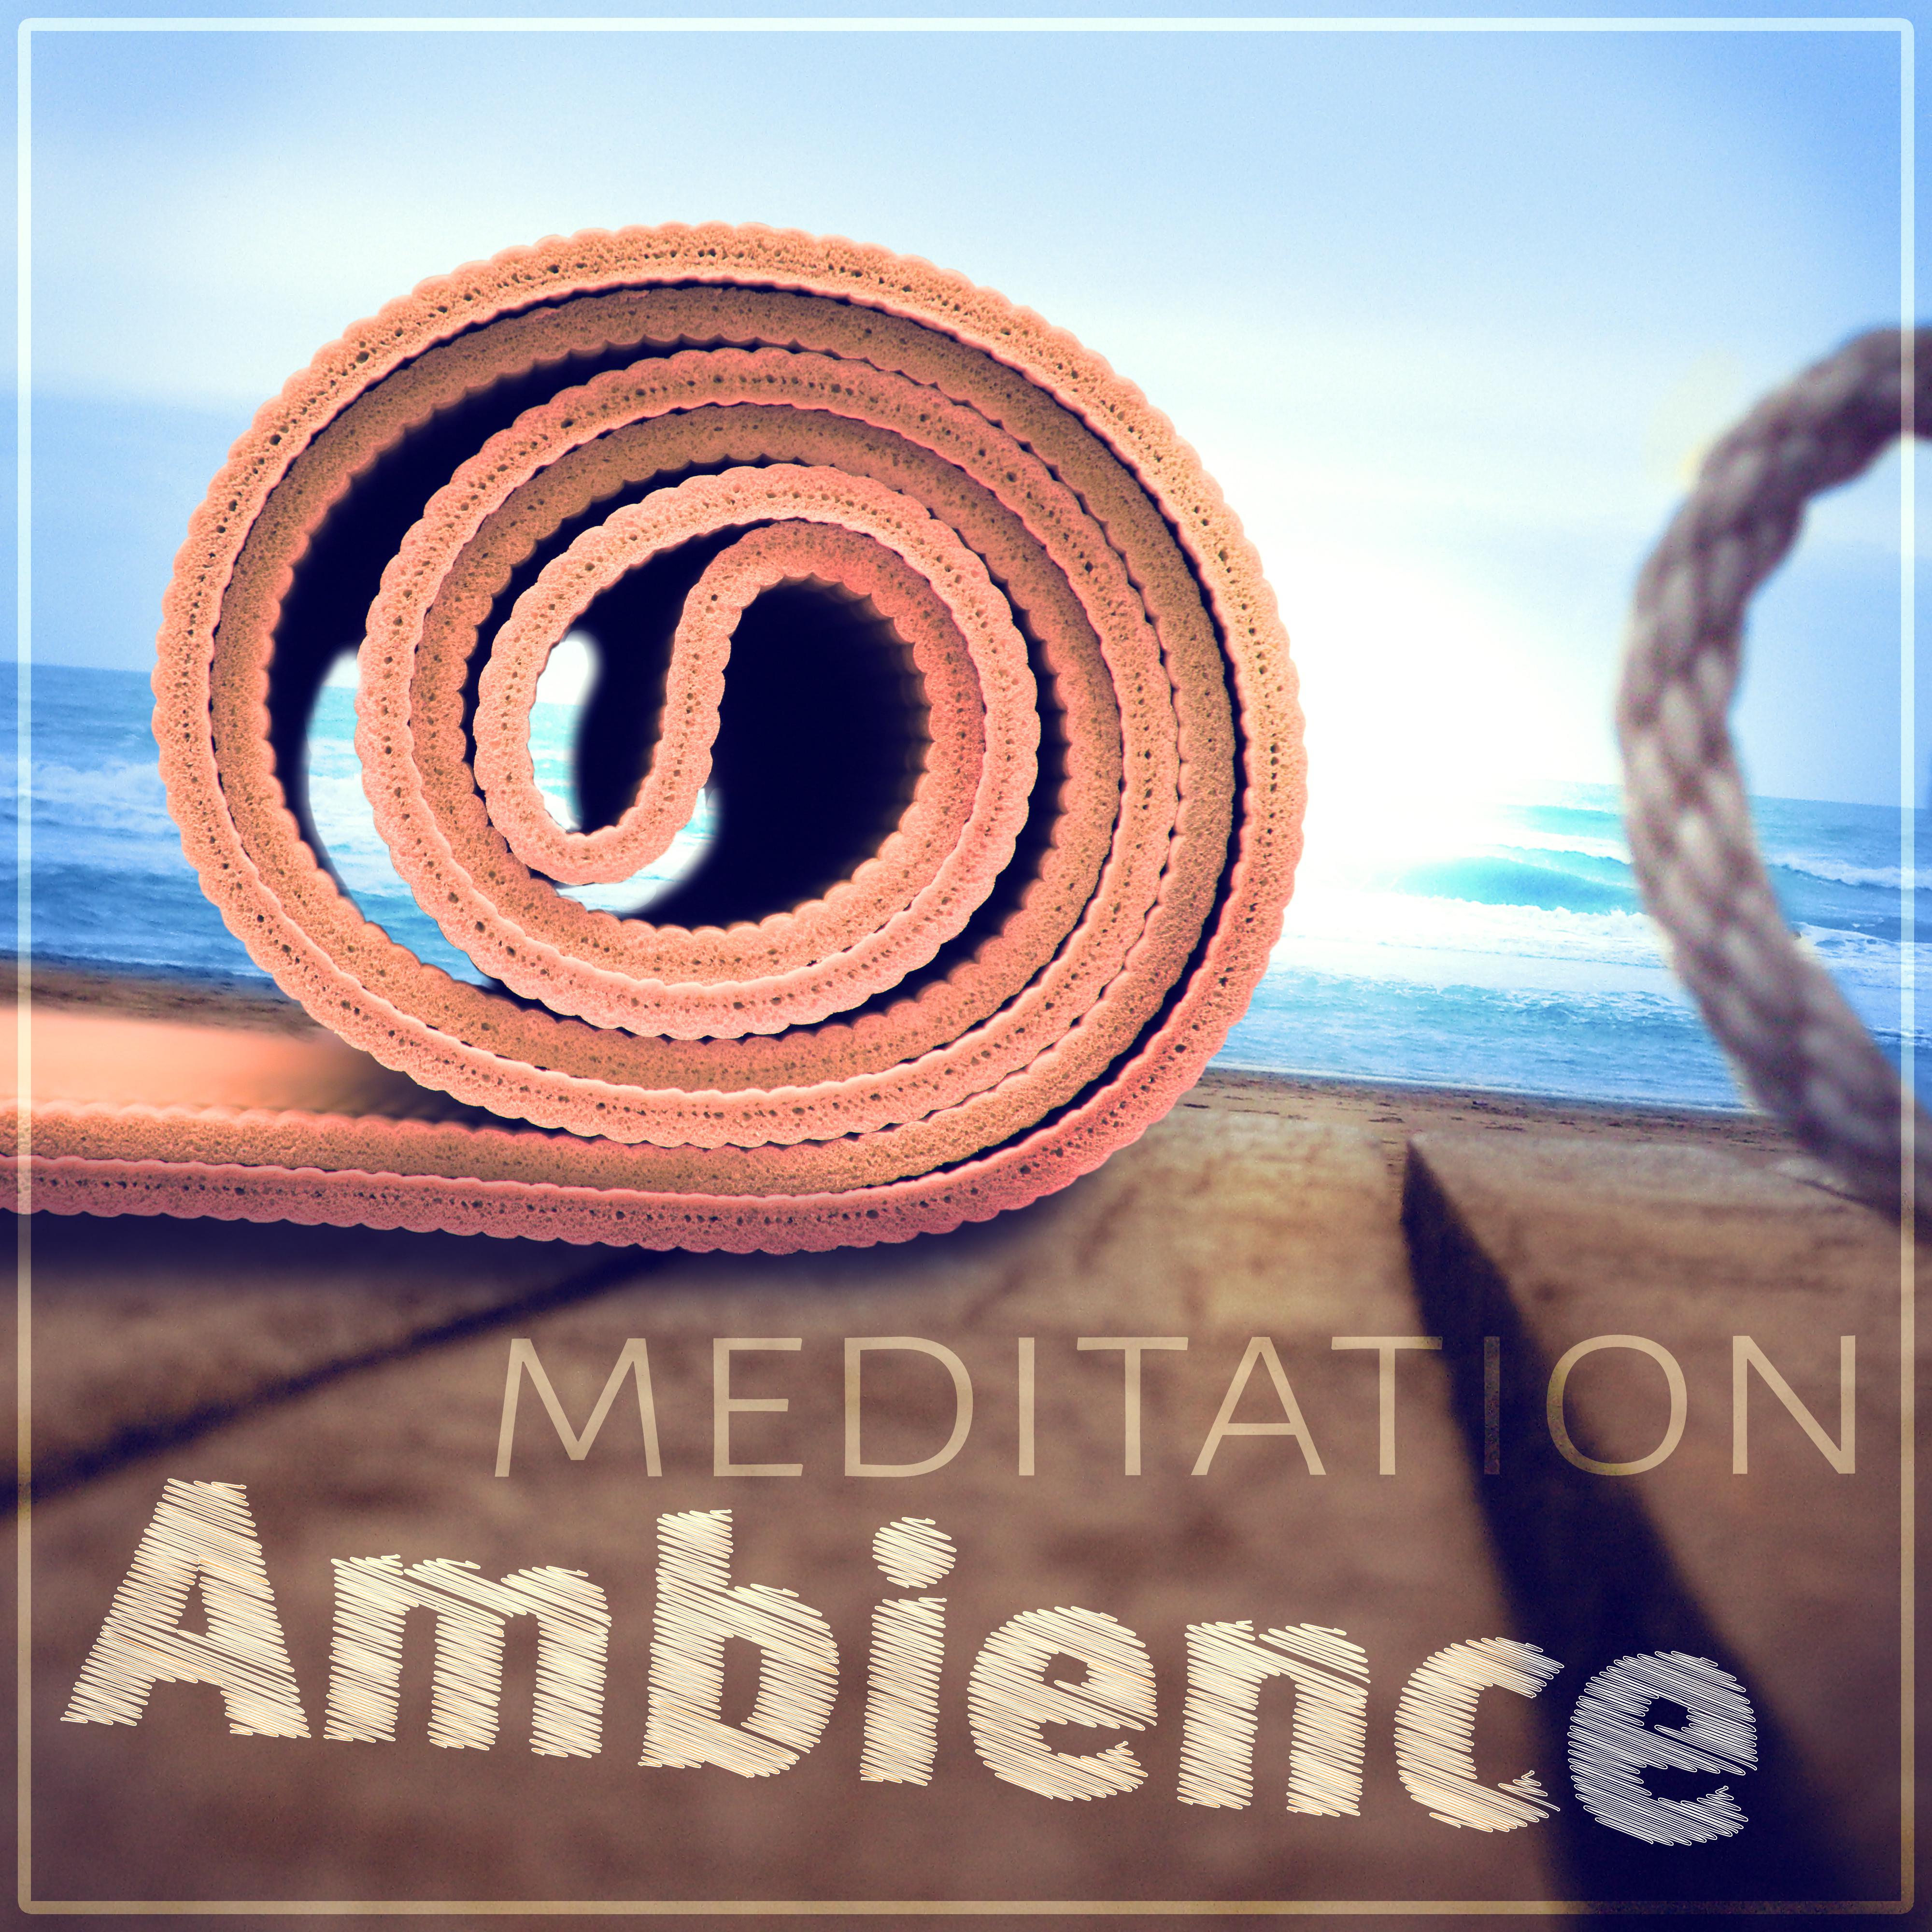 Meditation Ambience – Asian Zen, Relaxing Songs, Mindfulness Meditation, Sounds of Nature, Yoga Exercises, Spa Massage, Natural White Noise